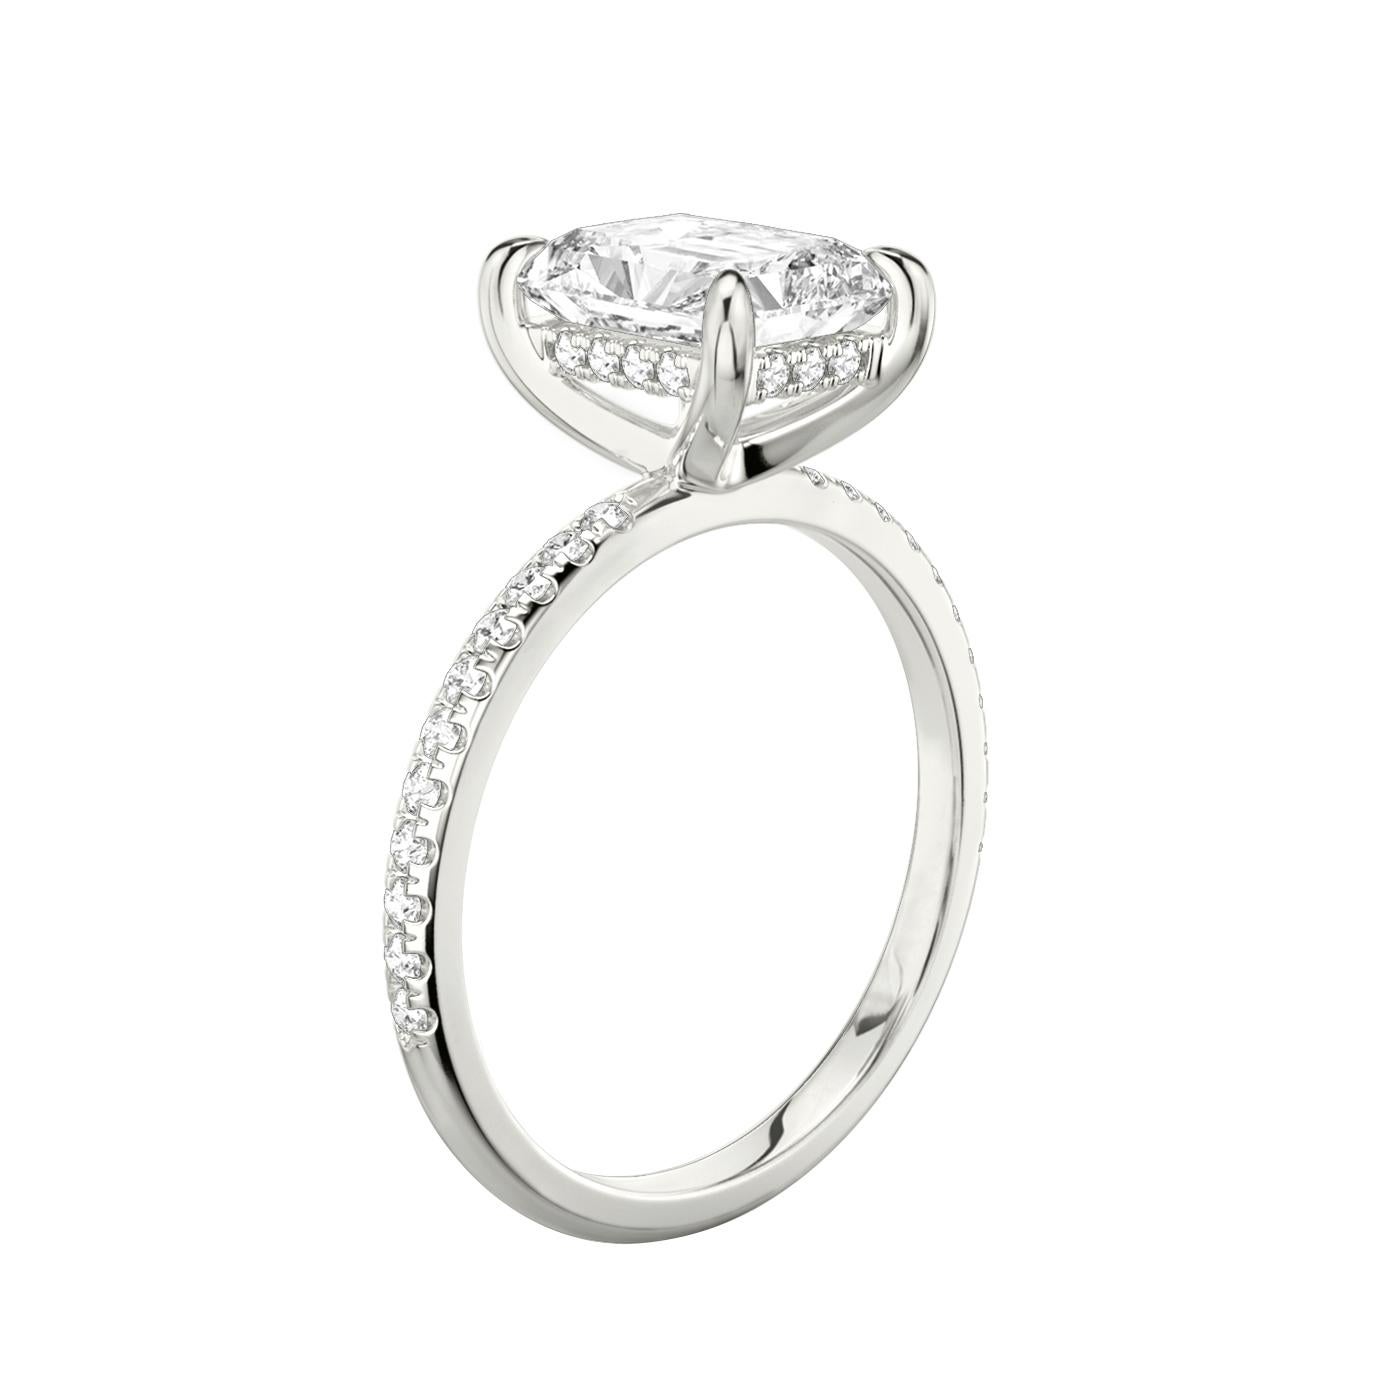 This classic engagement ring is a breathtaking expression of love and commitment. Crafted with impeccable attention to detail, it features a stunning 3.03 carat white and sparkling radiant cut natural diamond in the center features G color and VS1